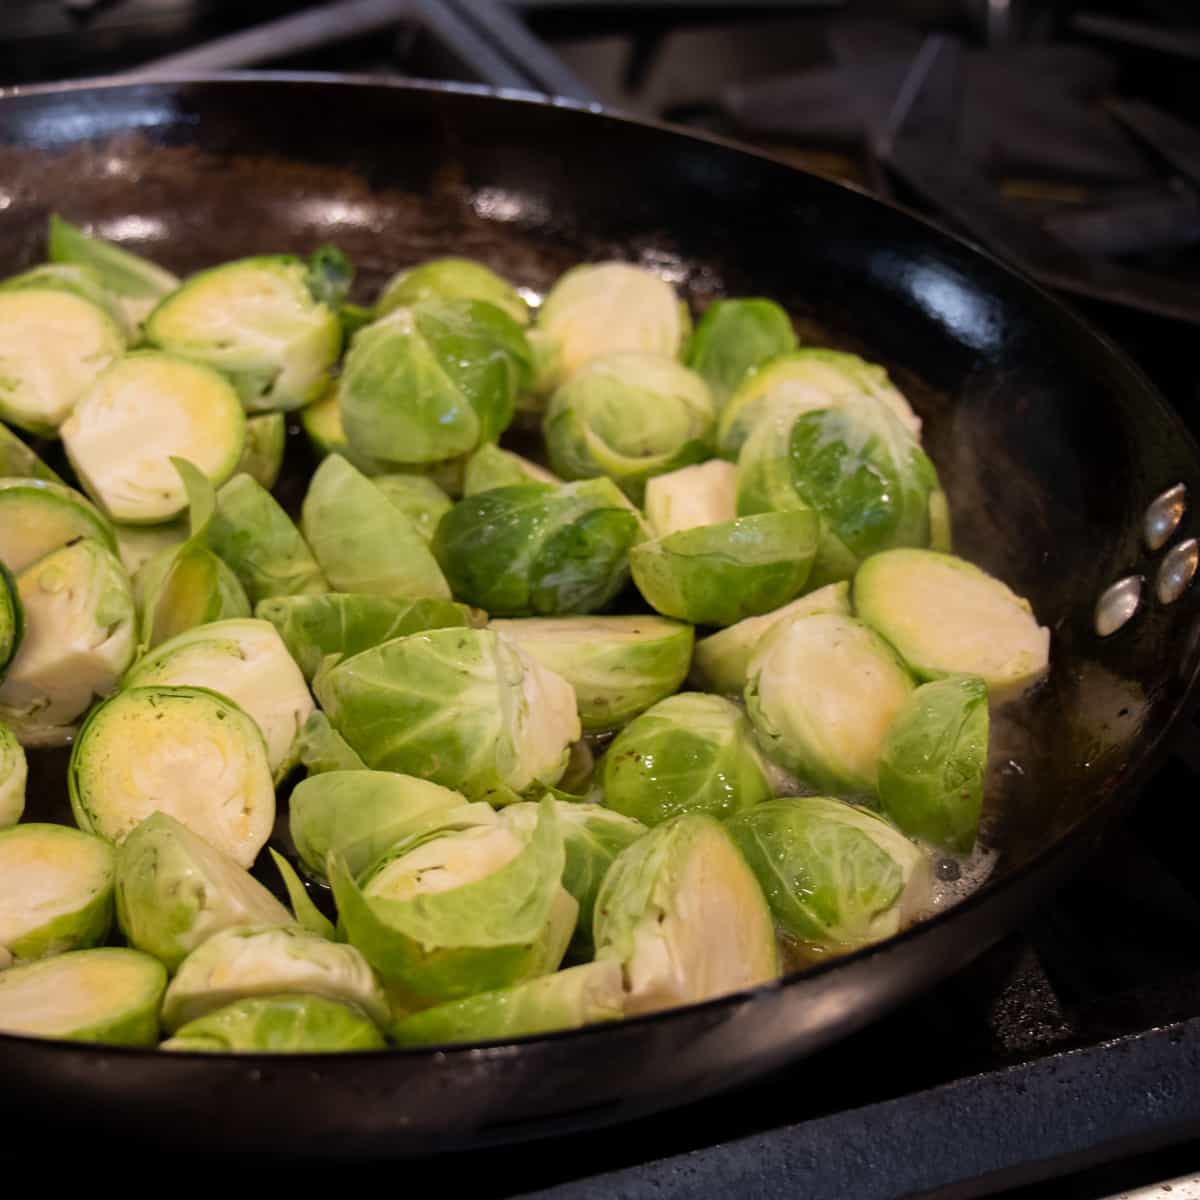 Halved brussels sprouts in a frying pan.